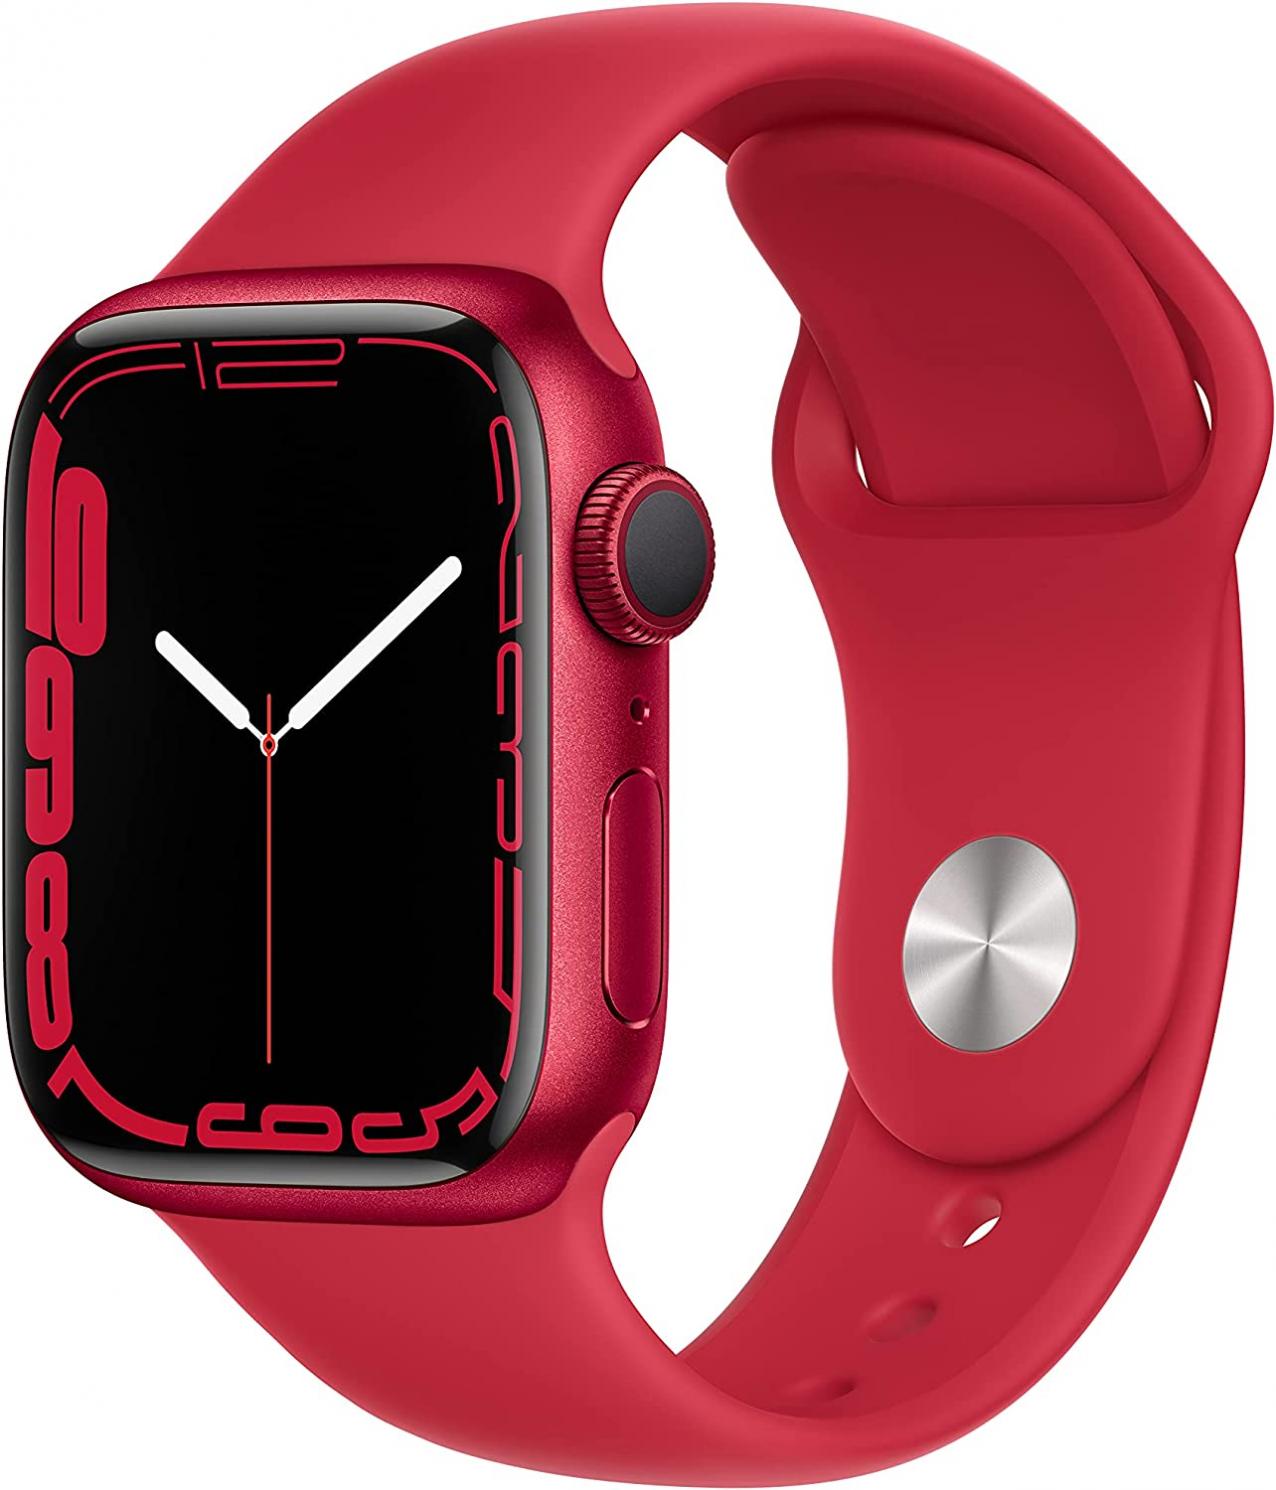 Apple Watch Series 7 (GPS, 41MM) - Red Aluminum Case with Red Sport Band (Renewed)